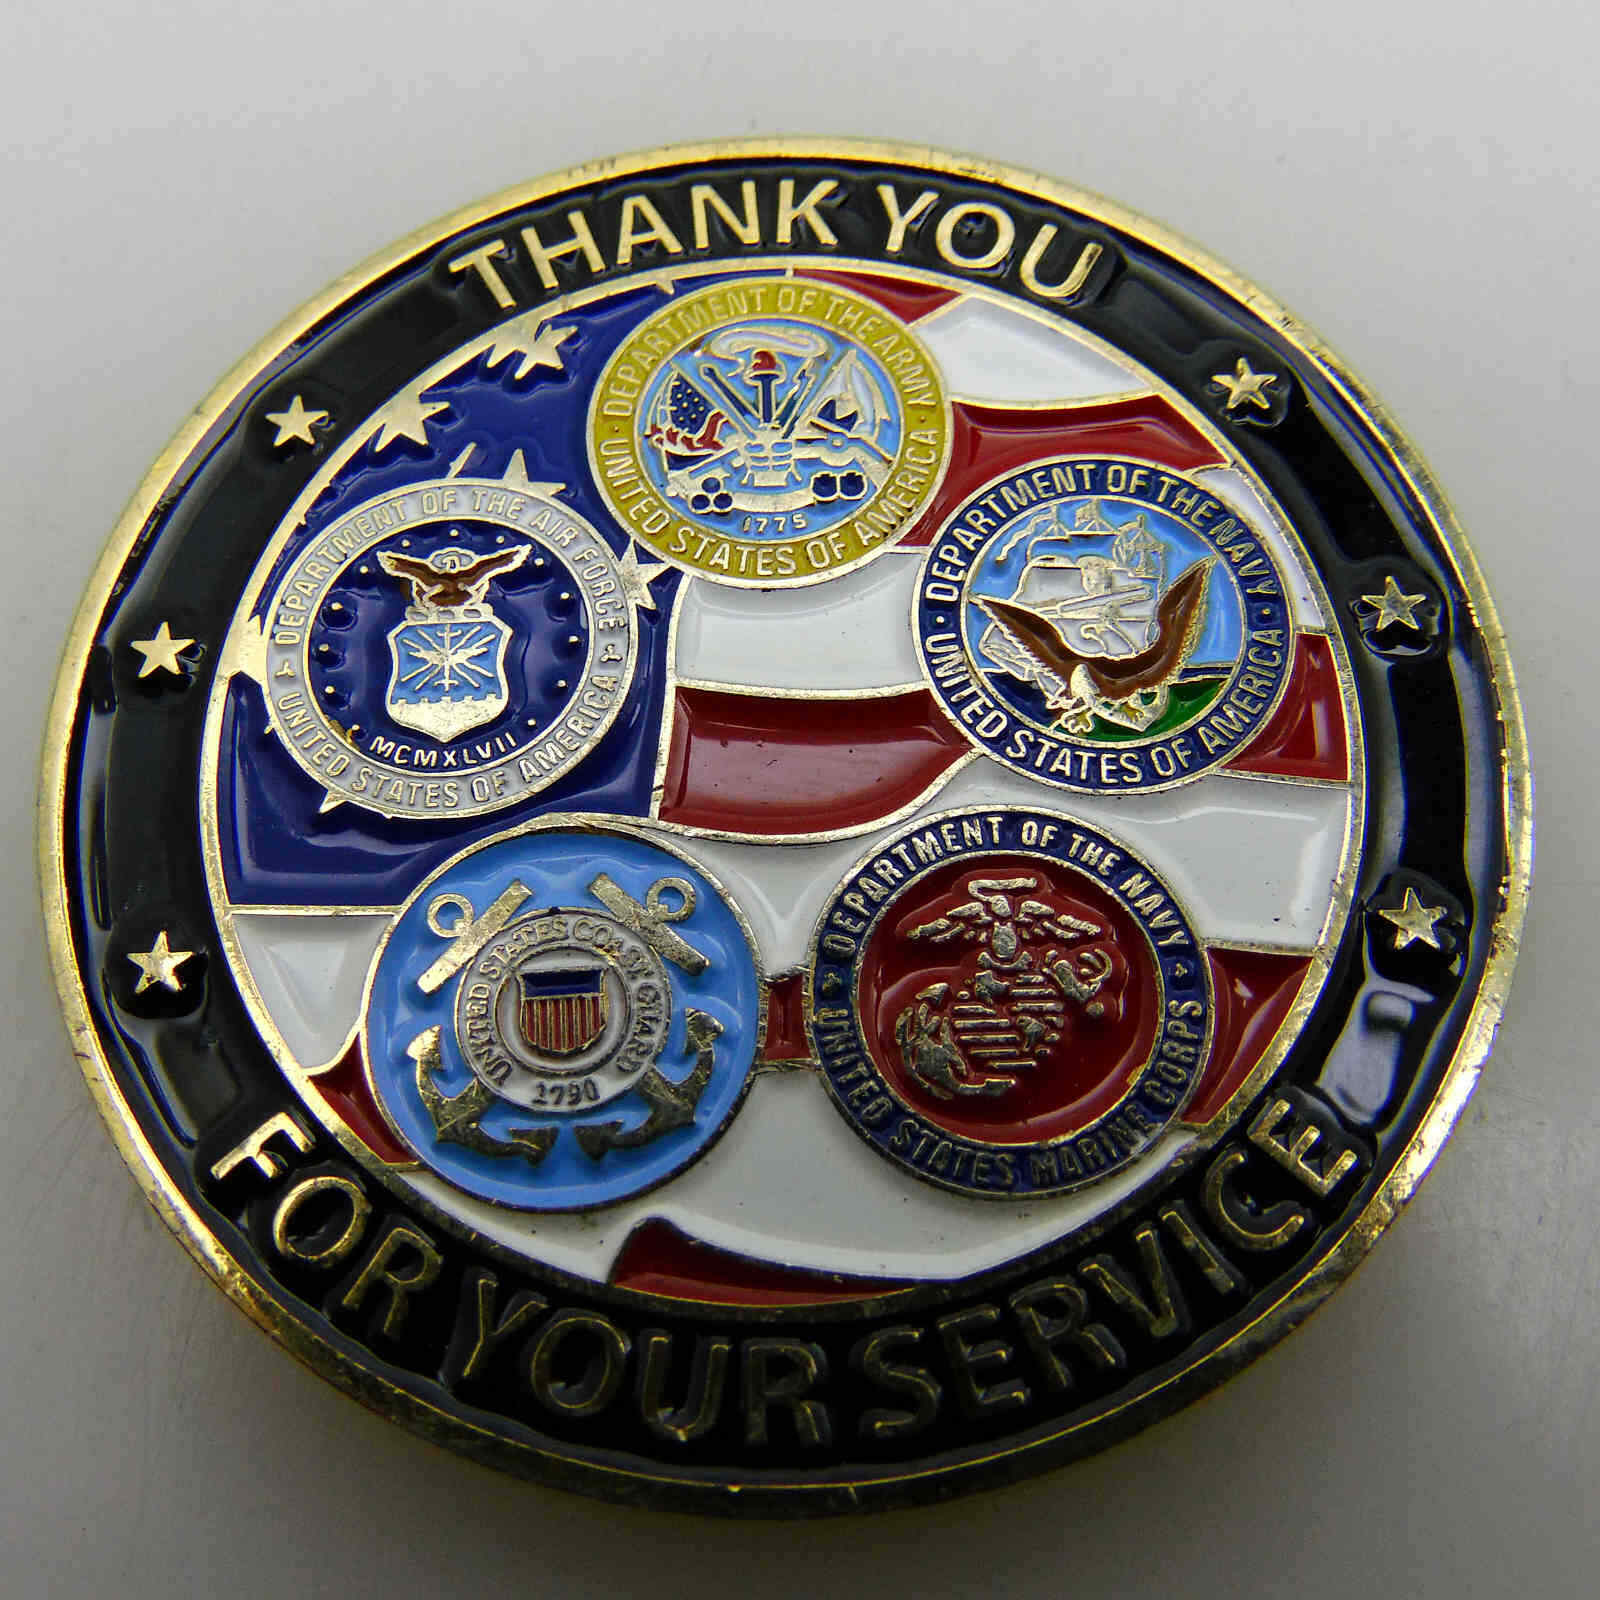 JOHNSON CONTROLS THANK YOU FOR YOUR SERVICE CHALLENGE COIN